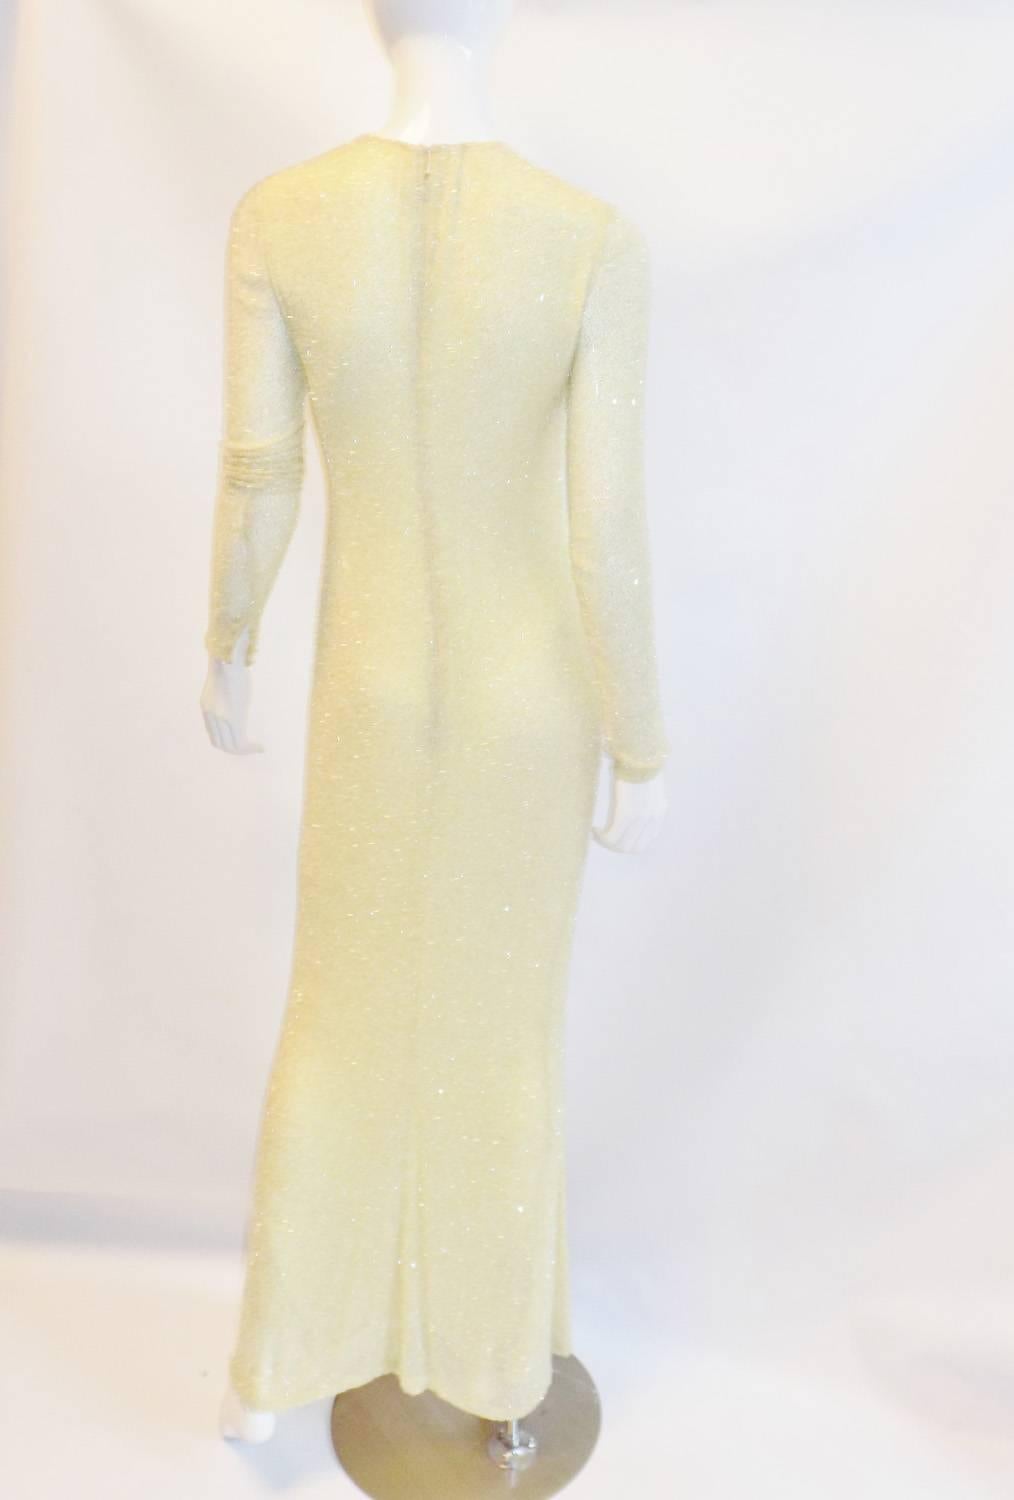 Pale yellow silk chiffon with clear beading makes this dress truly spectacular piece of art, very rare to find such a simple design yet so elegant and eye catching. The dress is entirely hand beaded and in fantastic condition. Very clean without